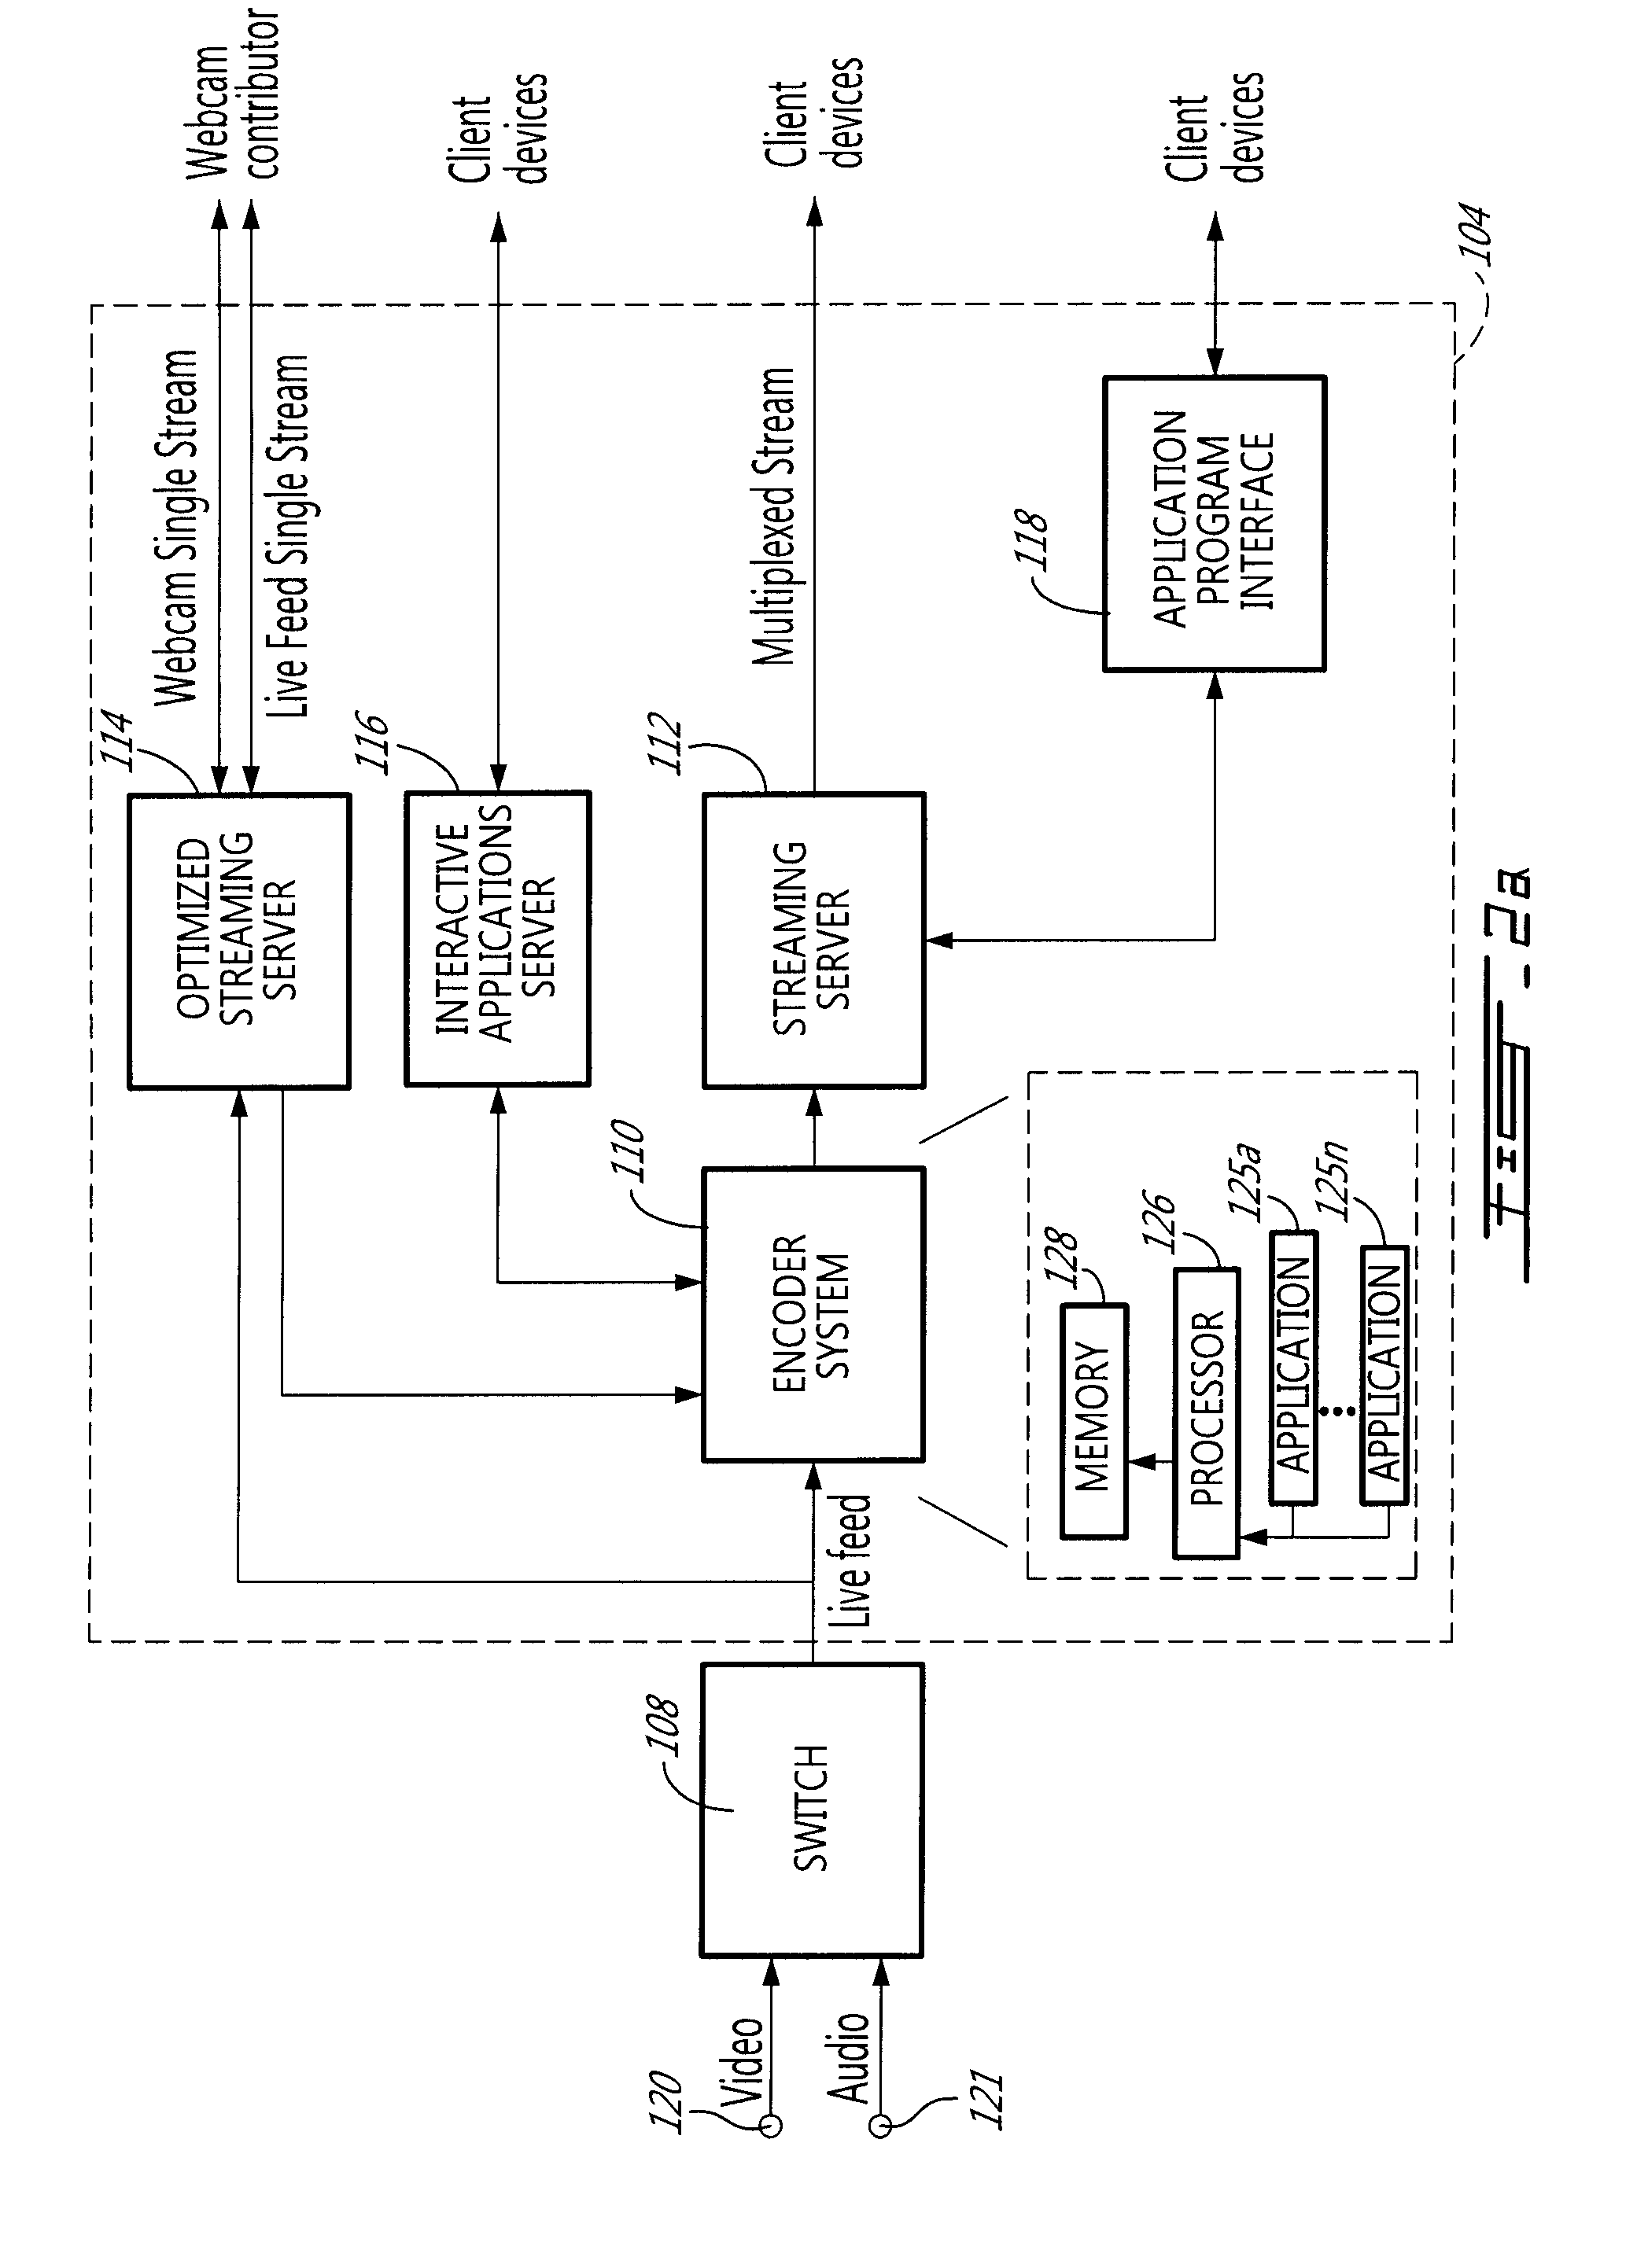 System and method for broadcasting interactive content